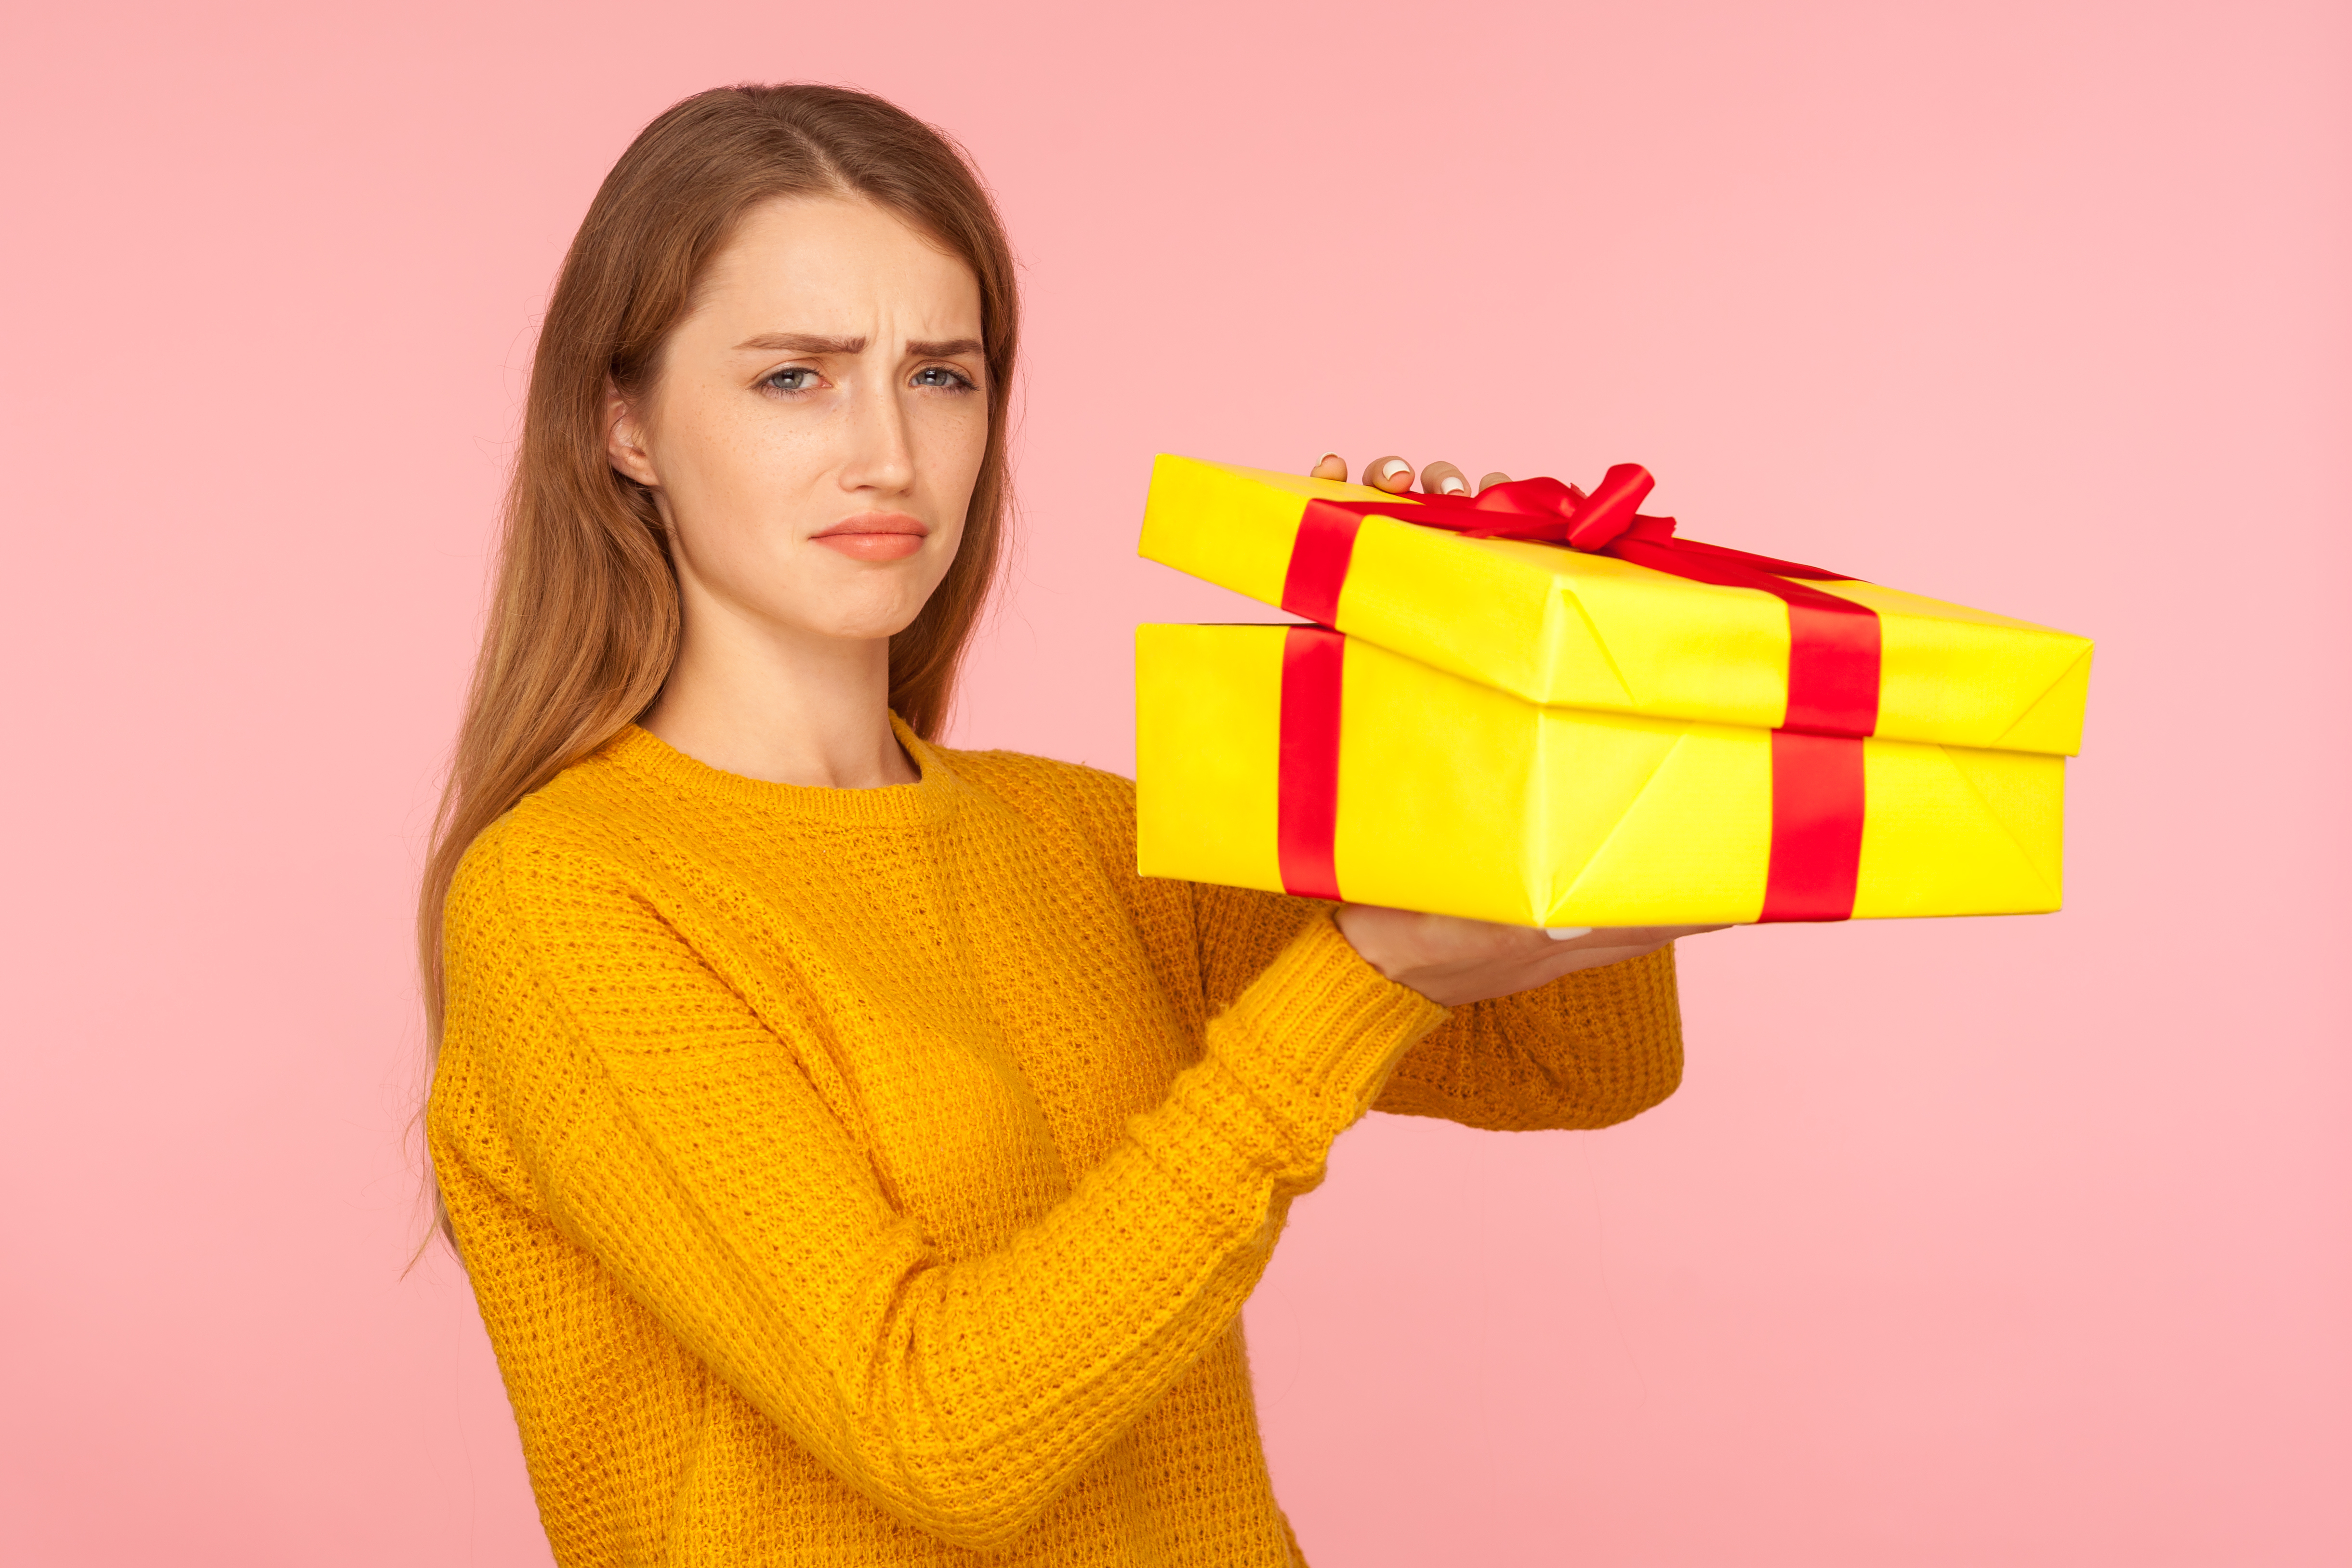 A disappointed woman holding a gift | Source: Getty Images